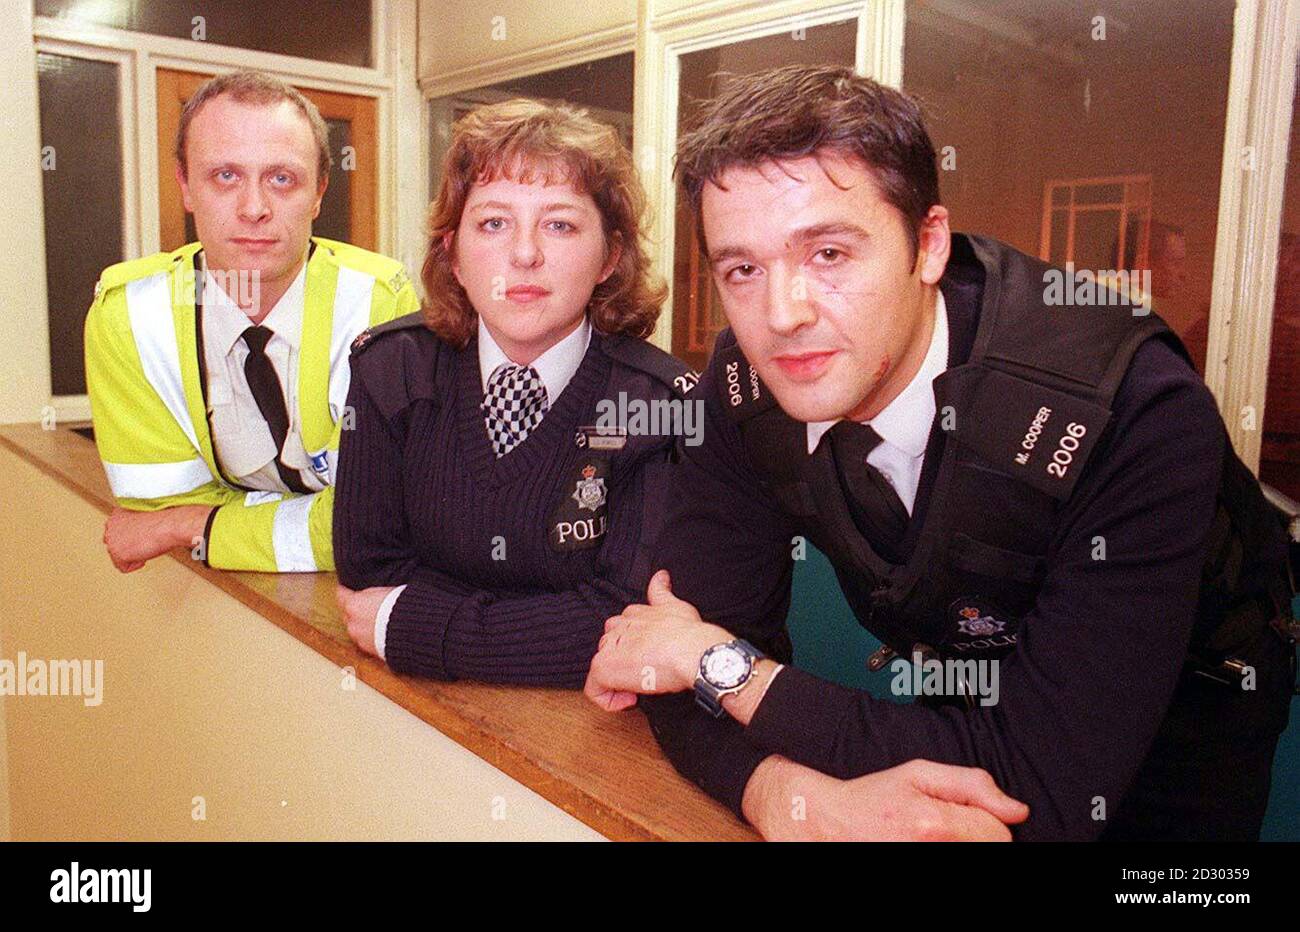 Police officers Chris Fearn (left), Lisa Powell and Mick Cooper, who were involved in the incident at Dalbury, Derbyshire Monday December 7, 1998 when a tractor driven by an angry far mer went on the rampage damaging cars, a caravan, walls and a fire engine. Police used CS gas in an attempt to disable the driver, but the vehicle was only stopped after armed officers fired shots at its tyres. A local man is being questioned by police over the incident. See PA story POLICE Tractor. PA Photo: Derby Evening Telegraph/Stuart Wilde. Stock Photo